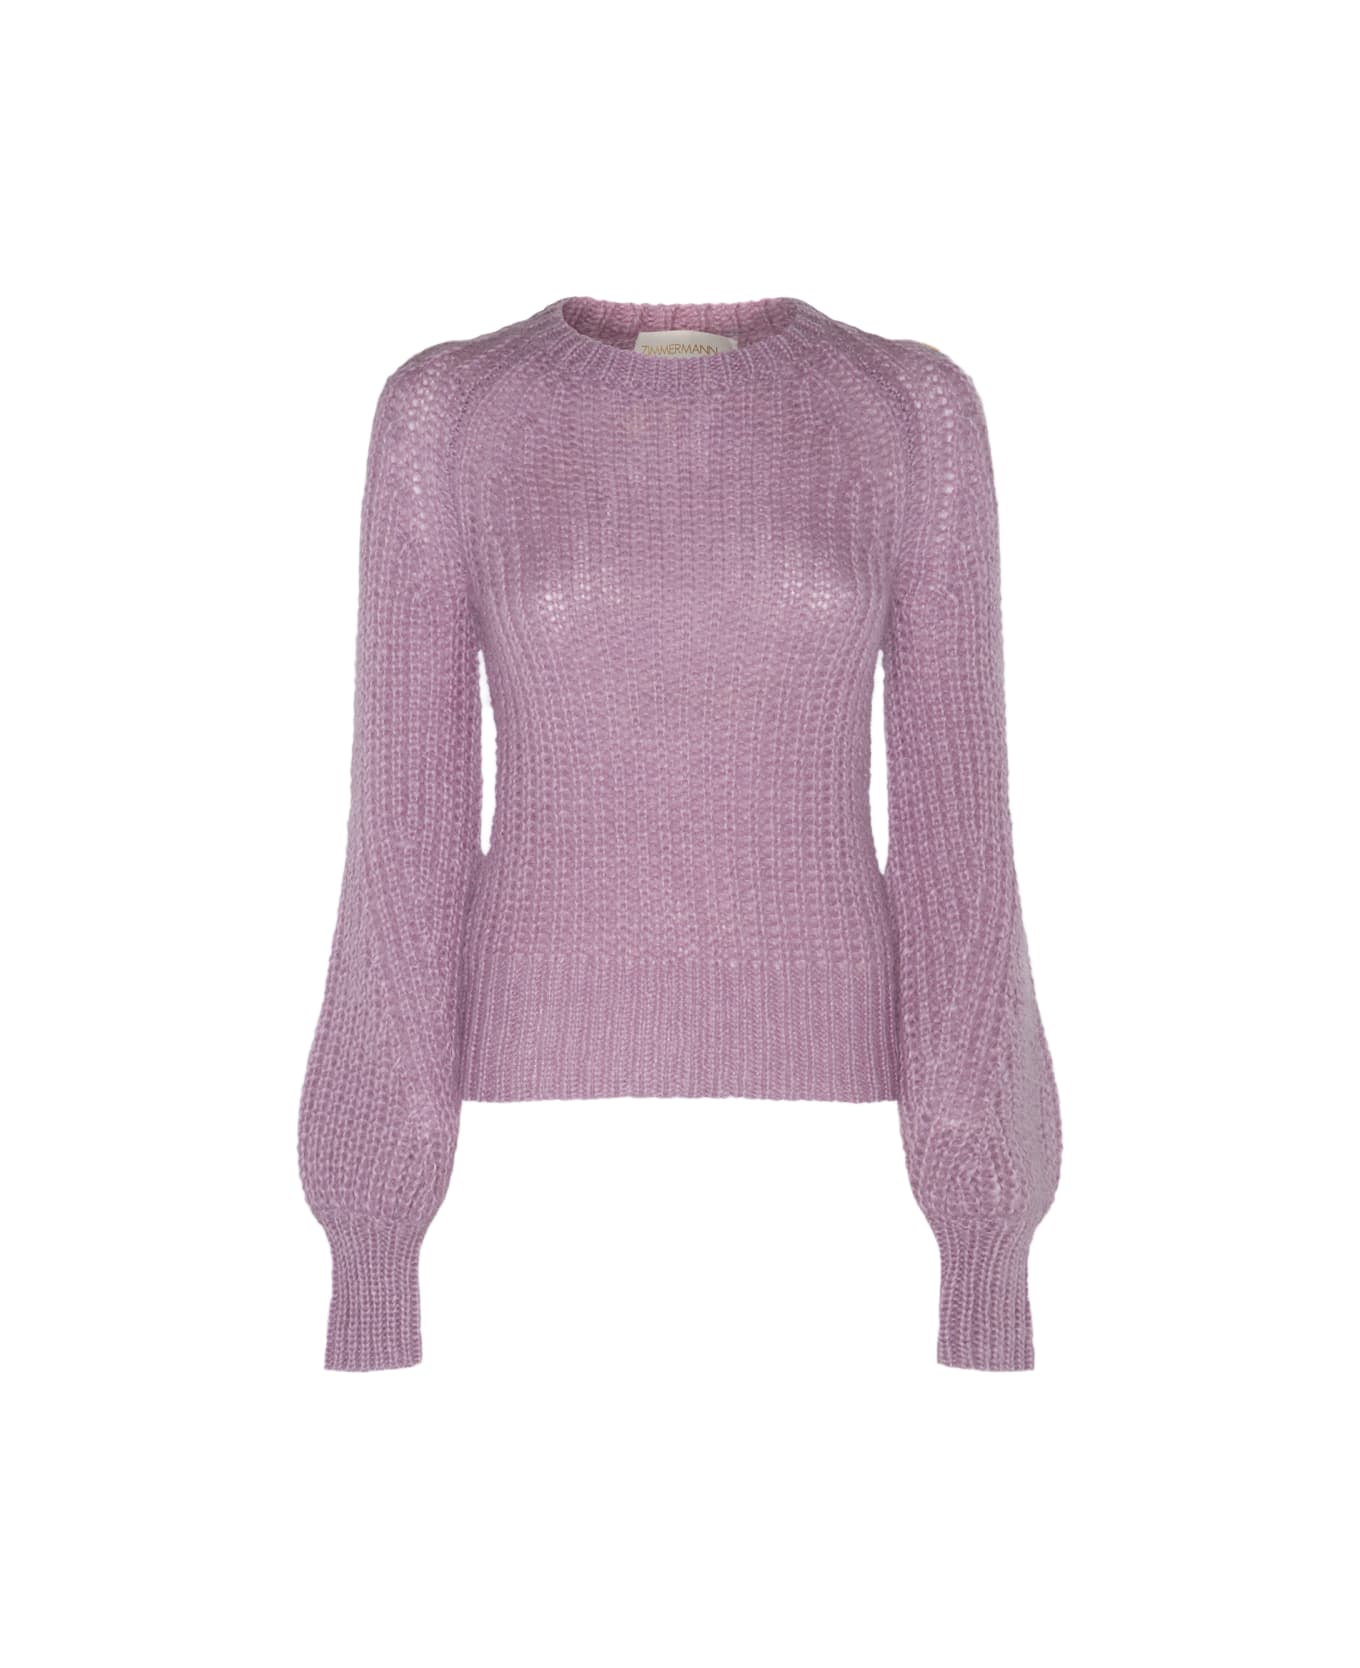 Zimmermann Dusty Lilac Mohair Blend Sweater - DUSTY LILAC ニットウェア